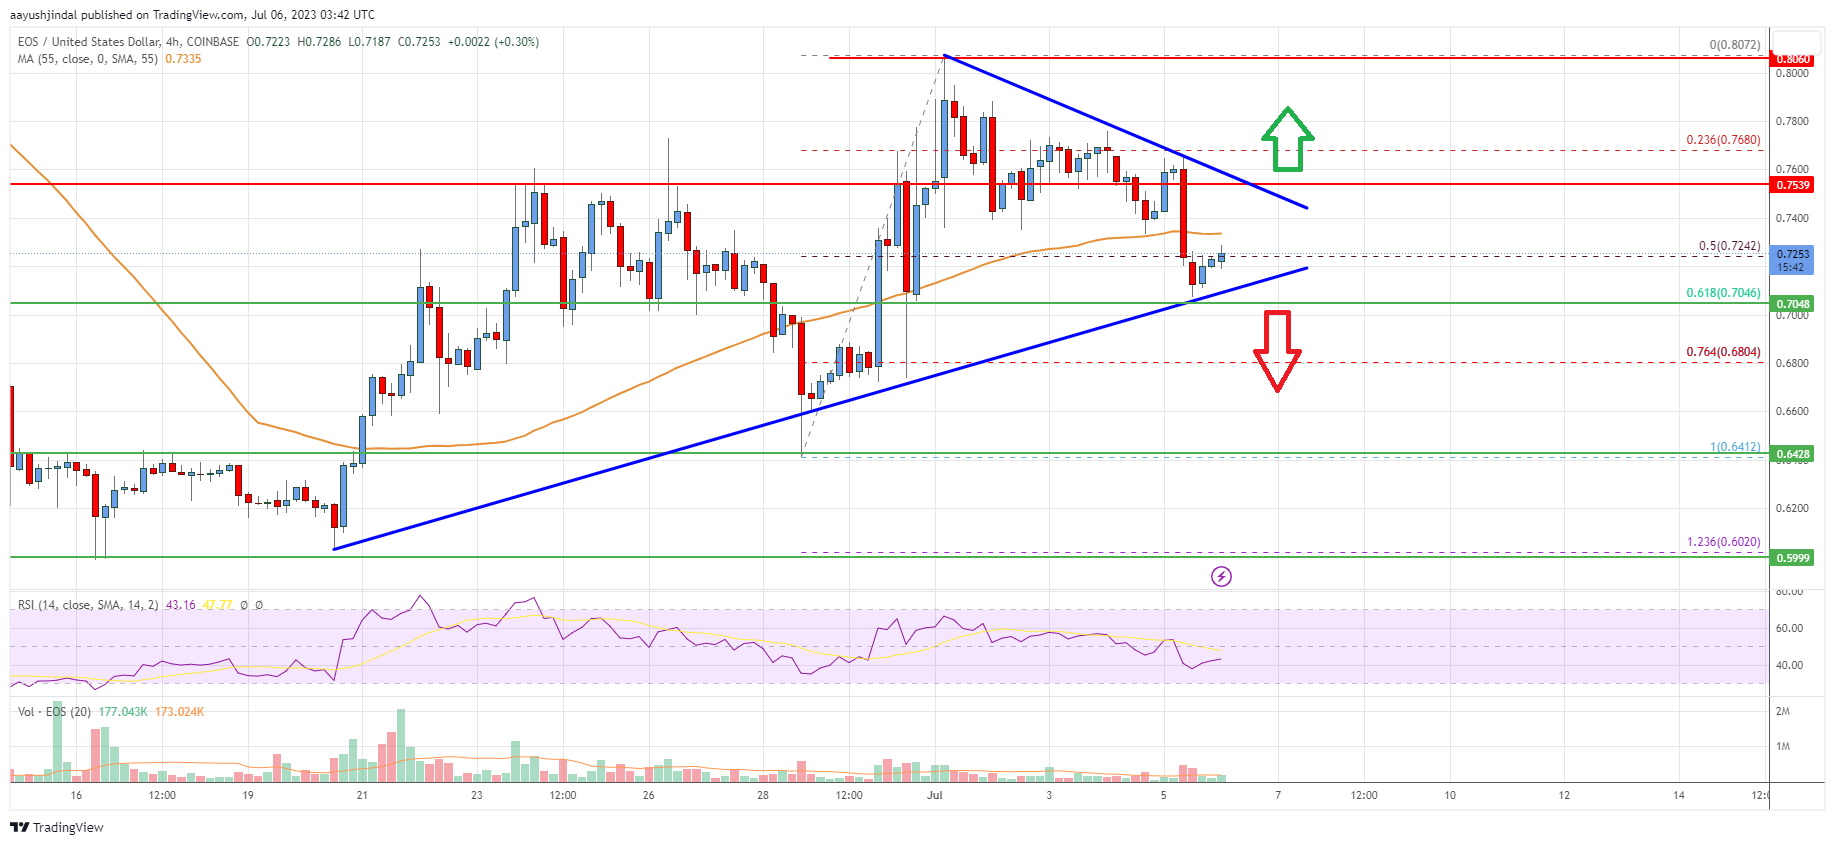 EOS Price Analysis: Bulls Protecting Key Support at $0.70